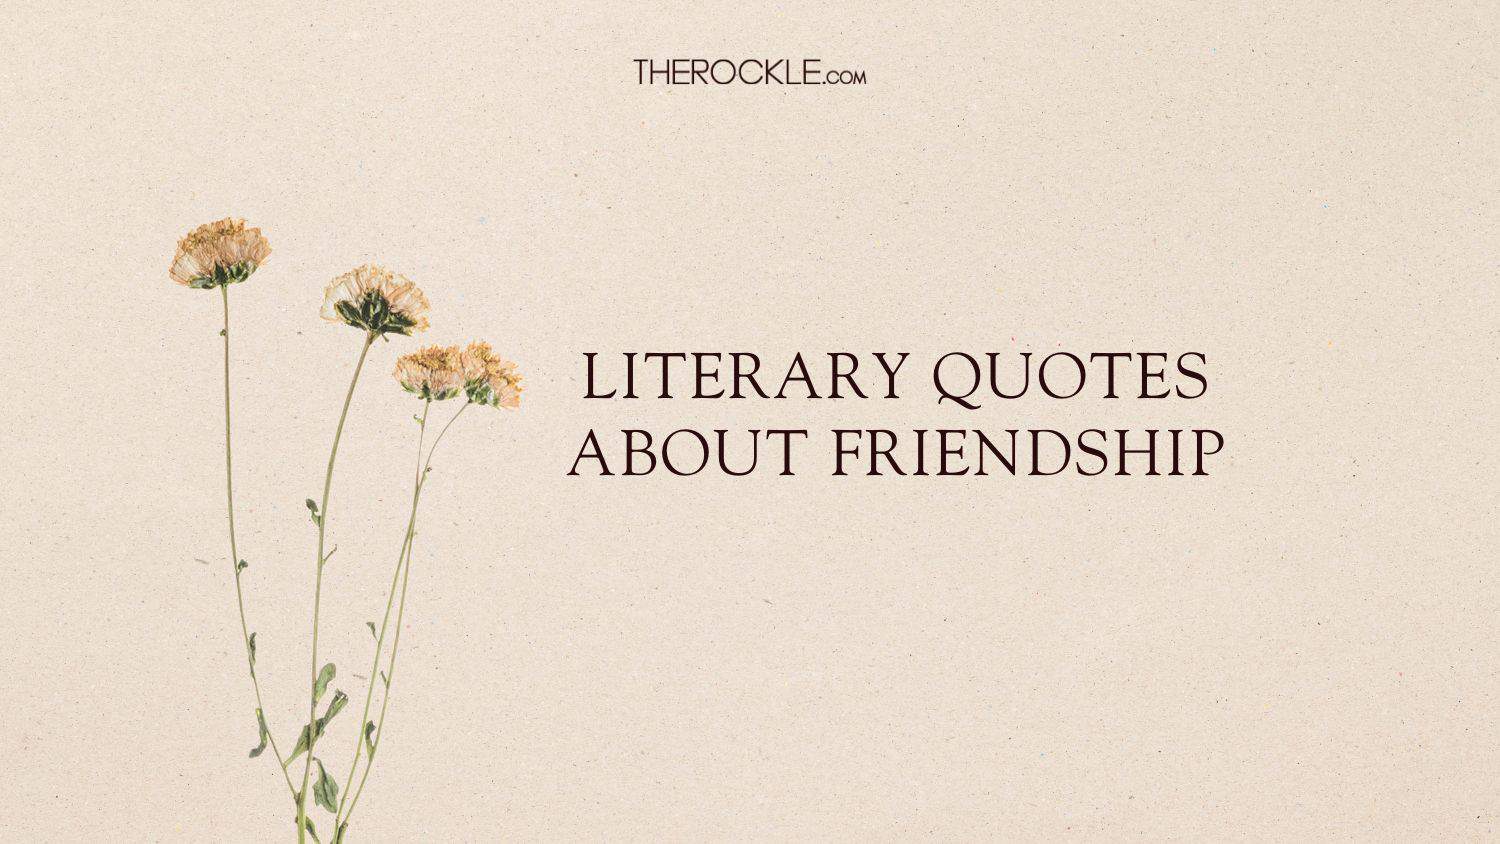 Literary quotes about friendship